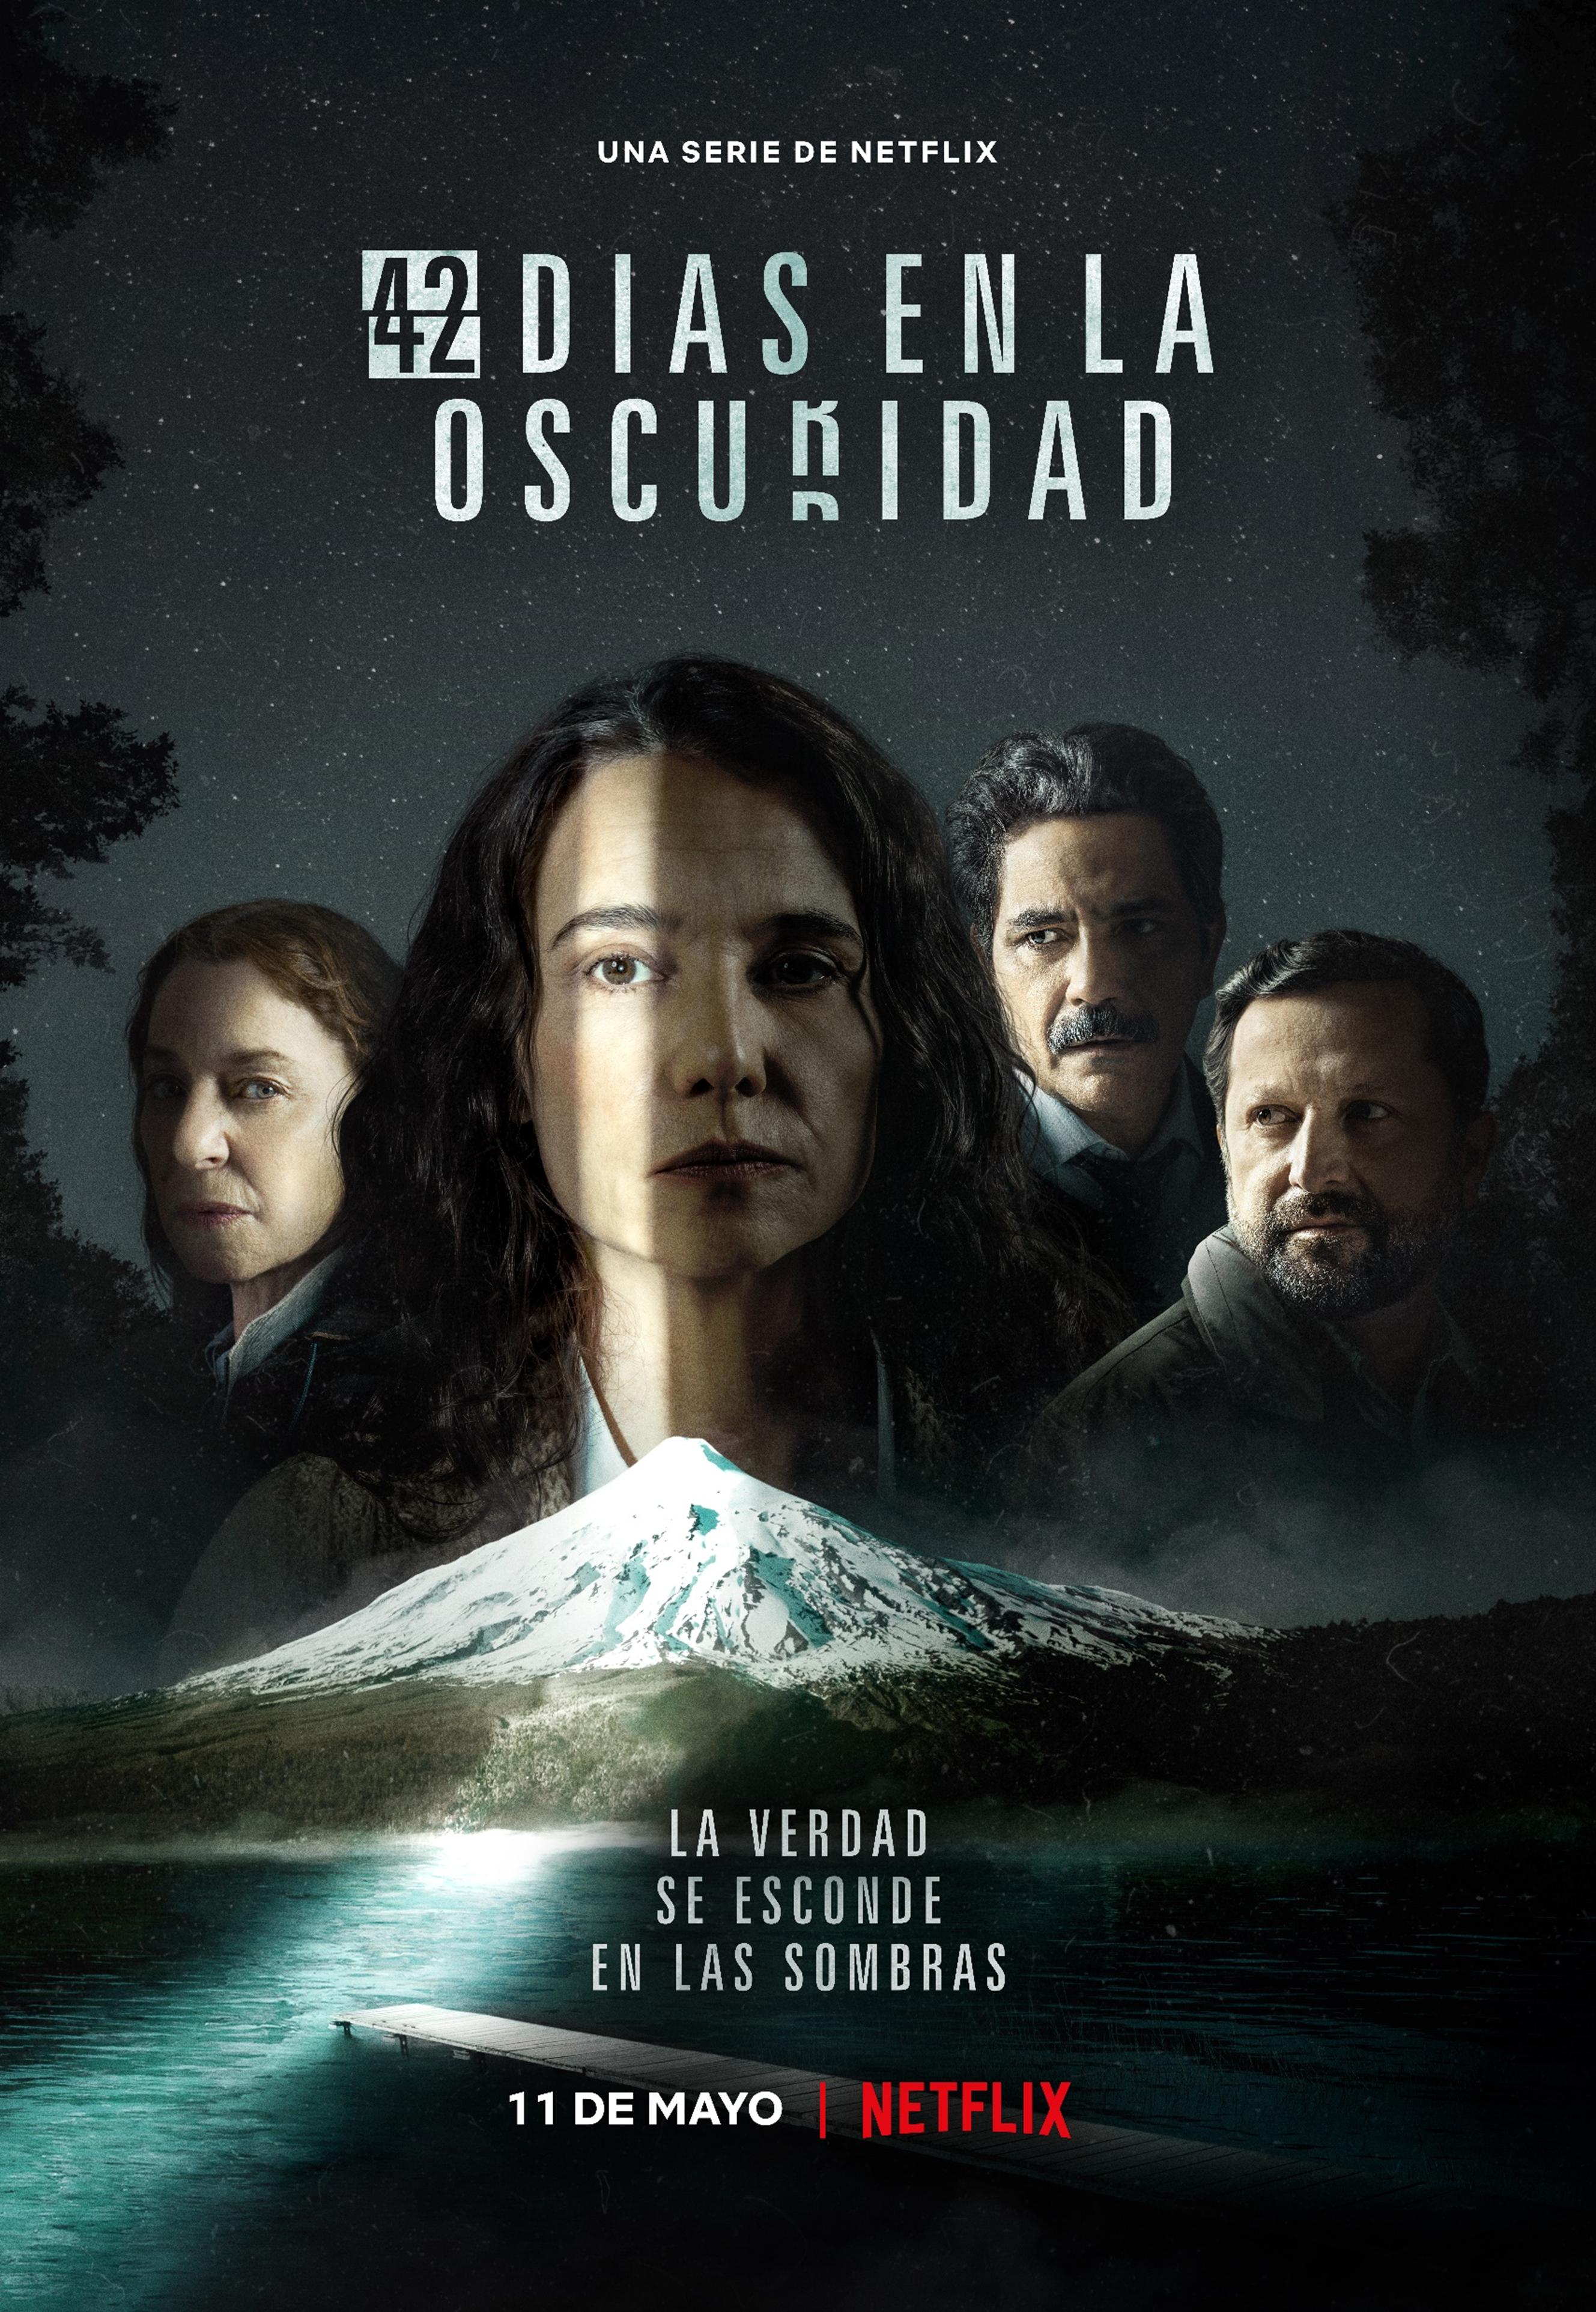 TV ratings for 42 Days Of Darkness (42 Días En La Oscuridad) in Rusia. Netflix TV series